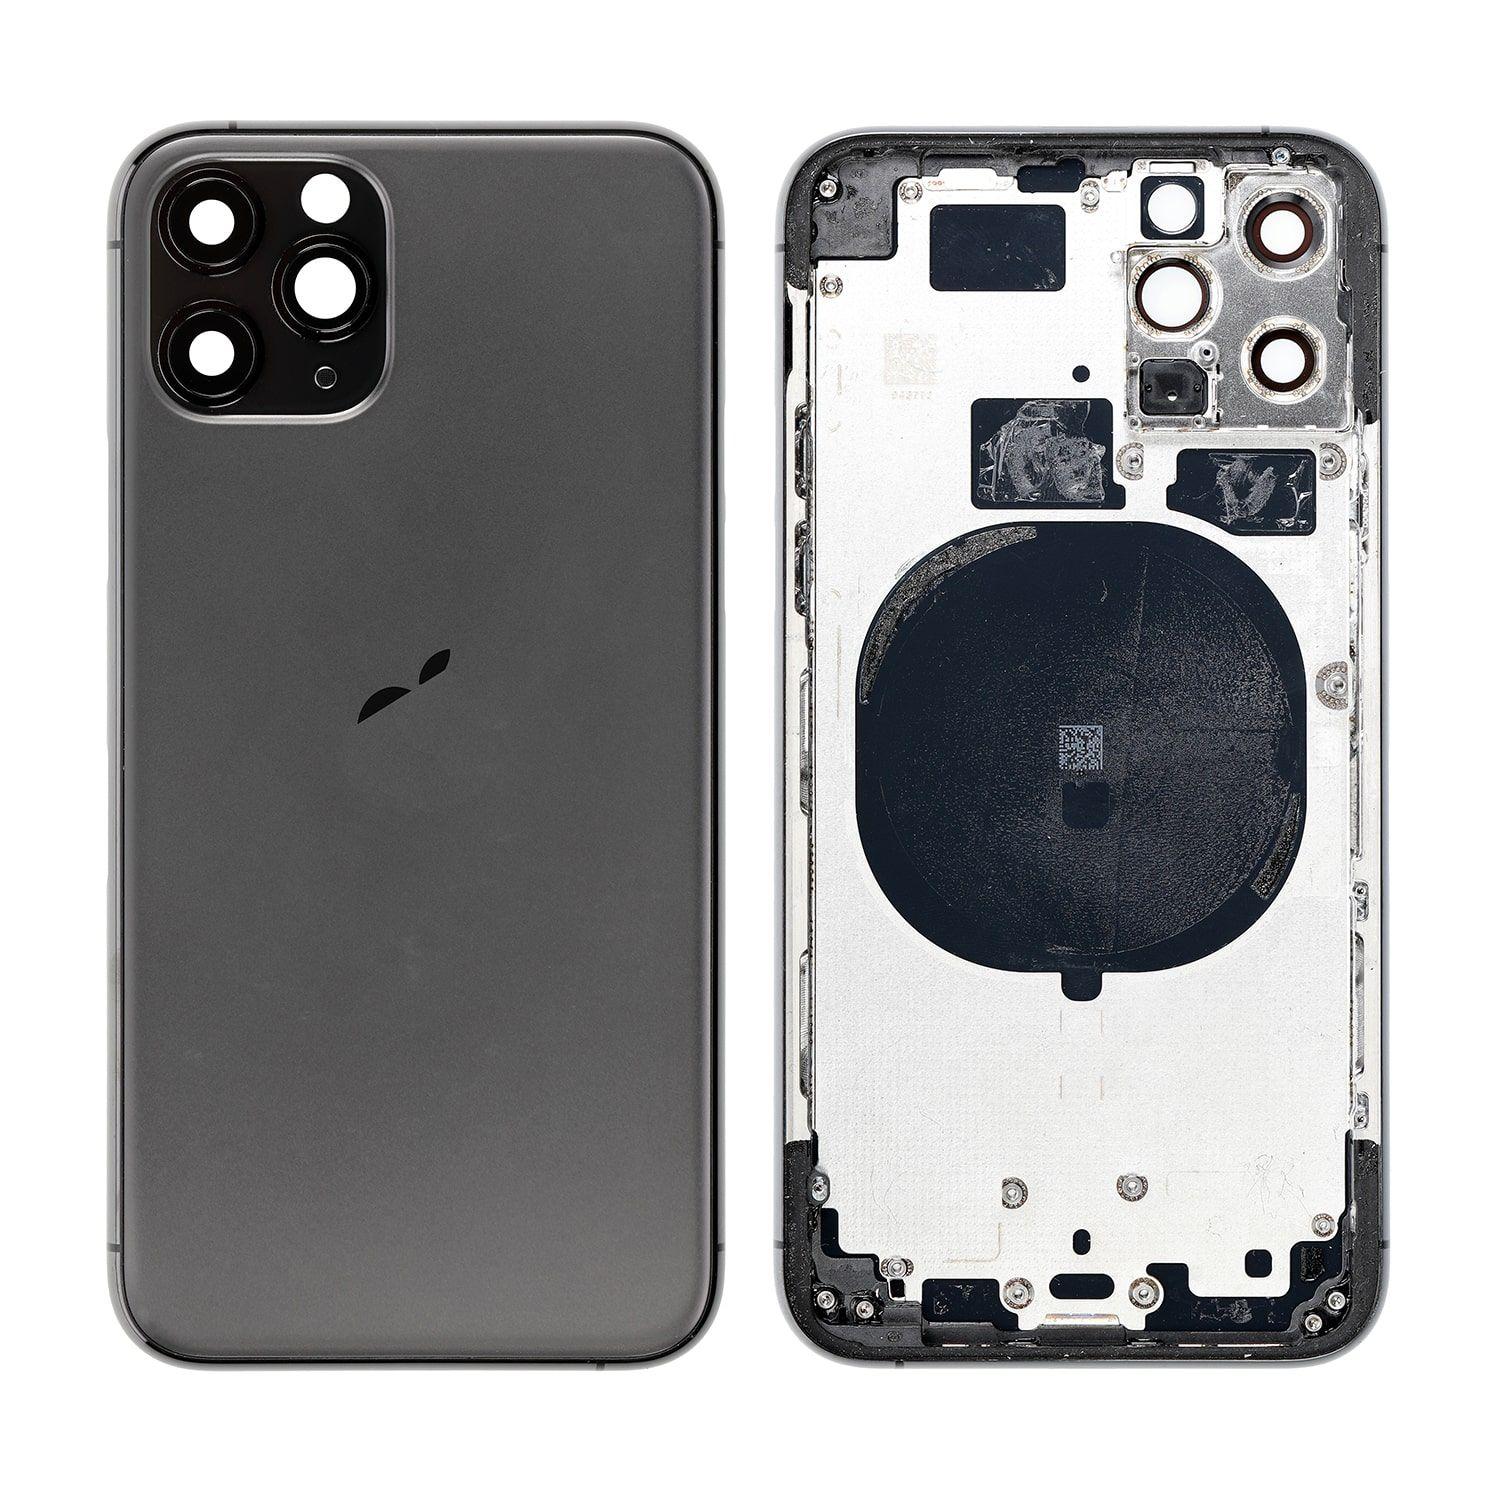 Body for iPhone 11 Pro + back cover black